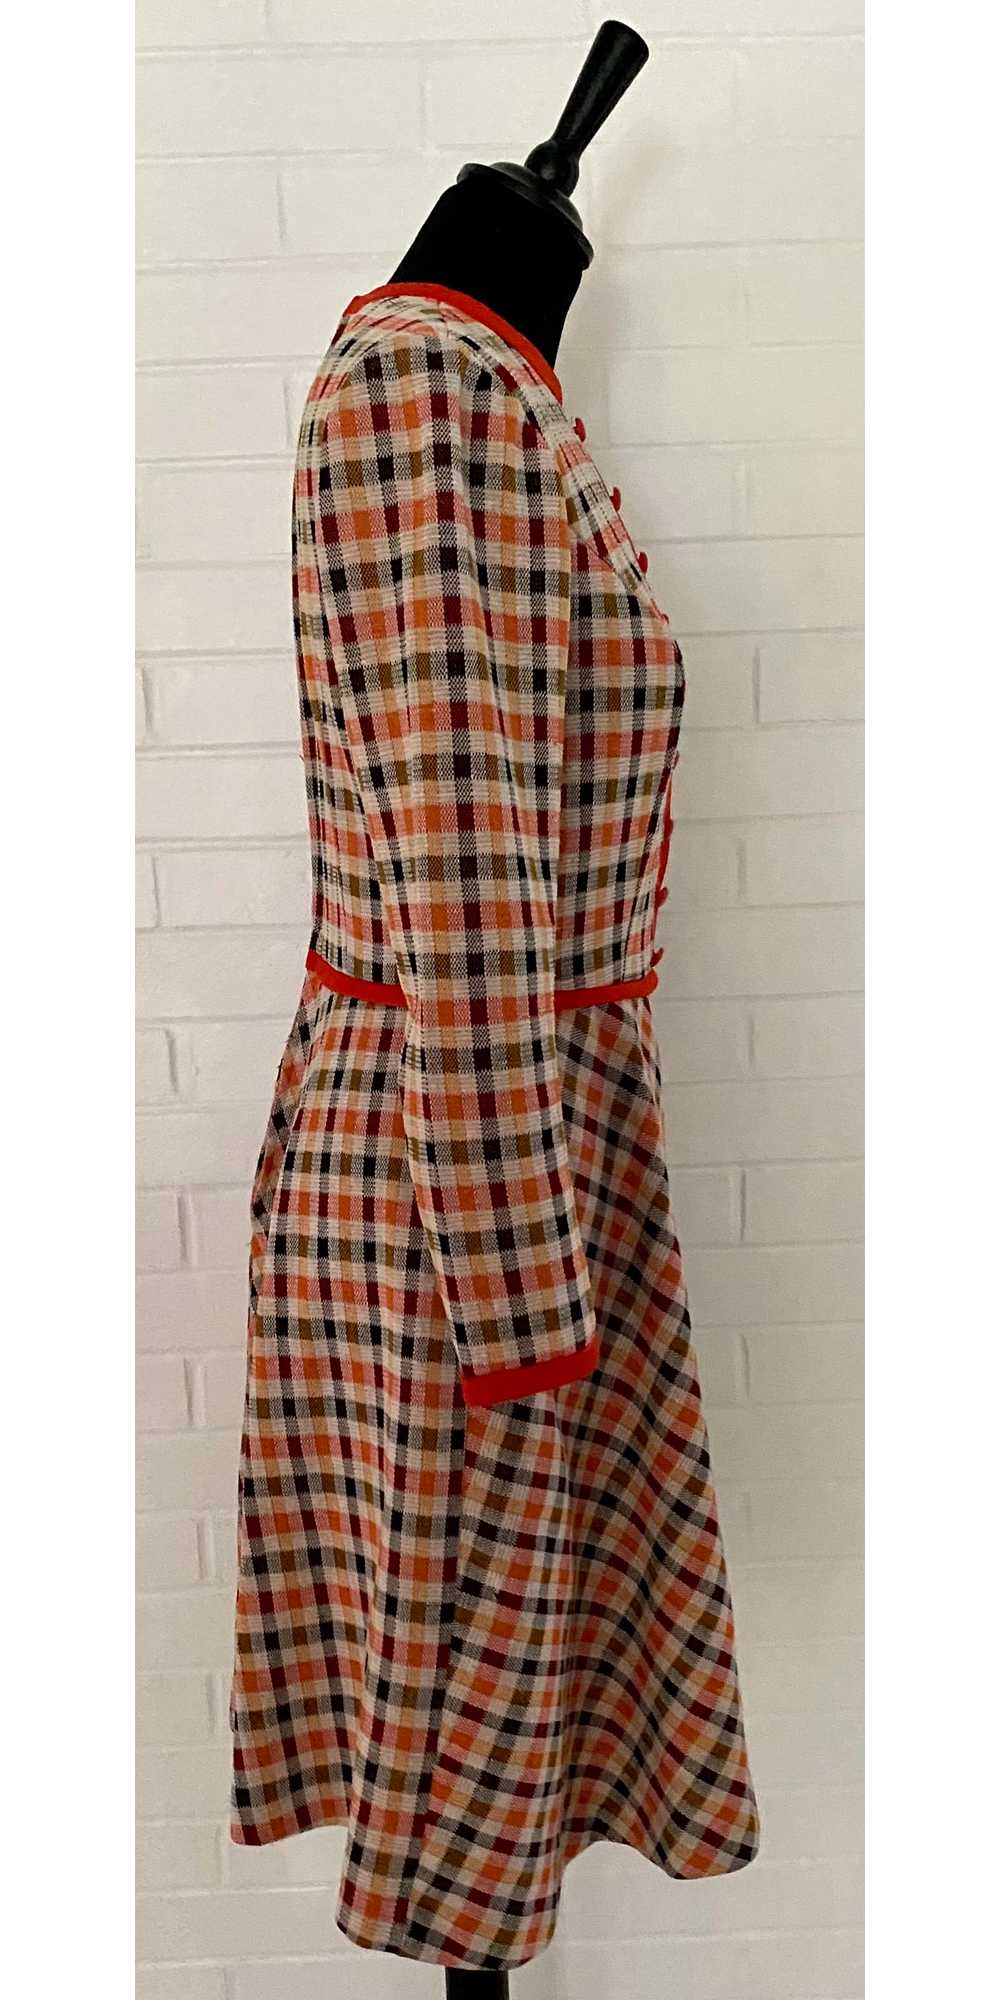 Late 60s/ Early 70s Bayberry Plaid Dress - image 4